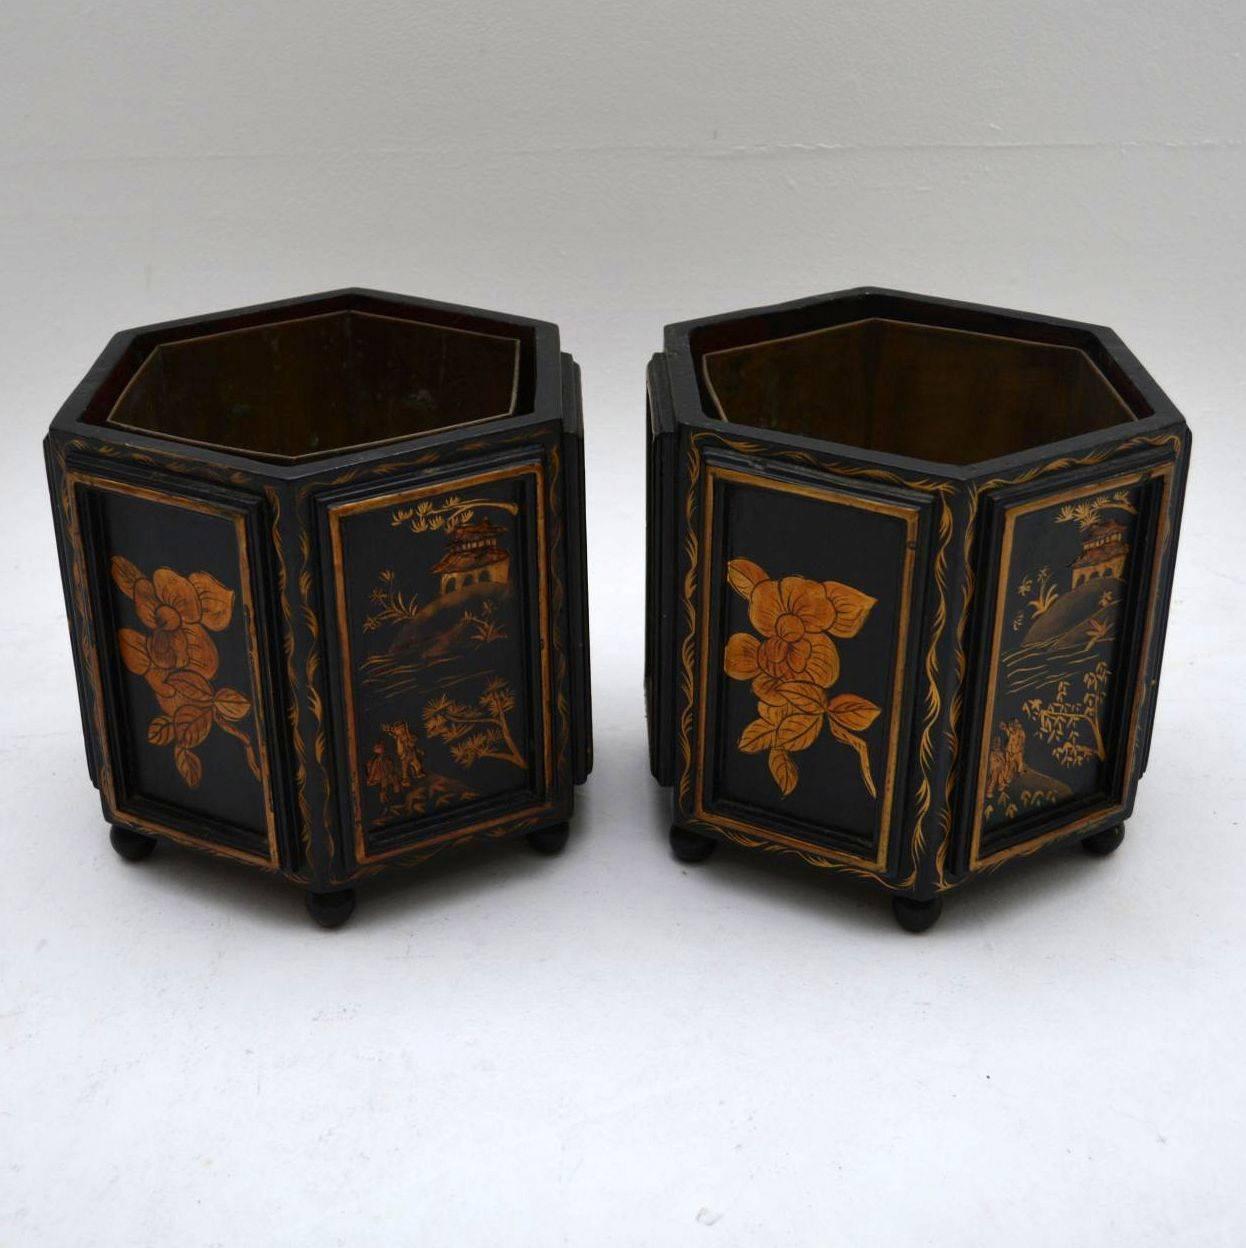 Pair of small antique chinoiserie plant holders in excellent original condition. They have the original copper liners inside which can be lifted out. These holders are beautifully decorated on black backgrounds and sit on small bun feet. Difficult